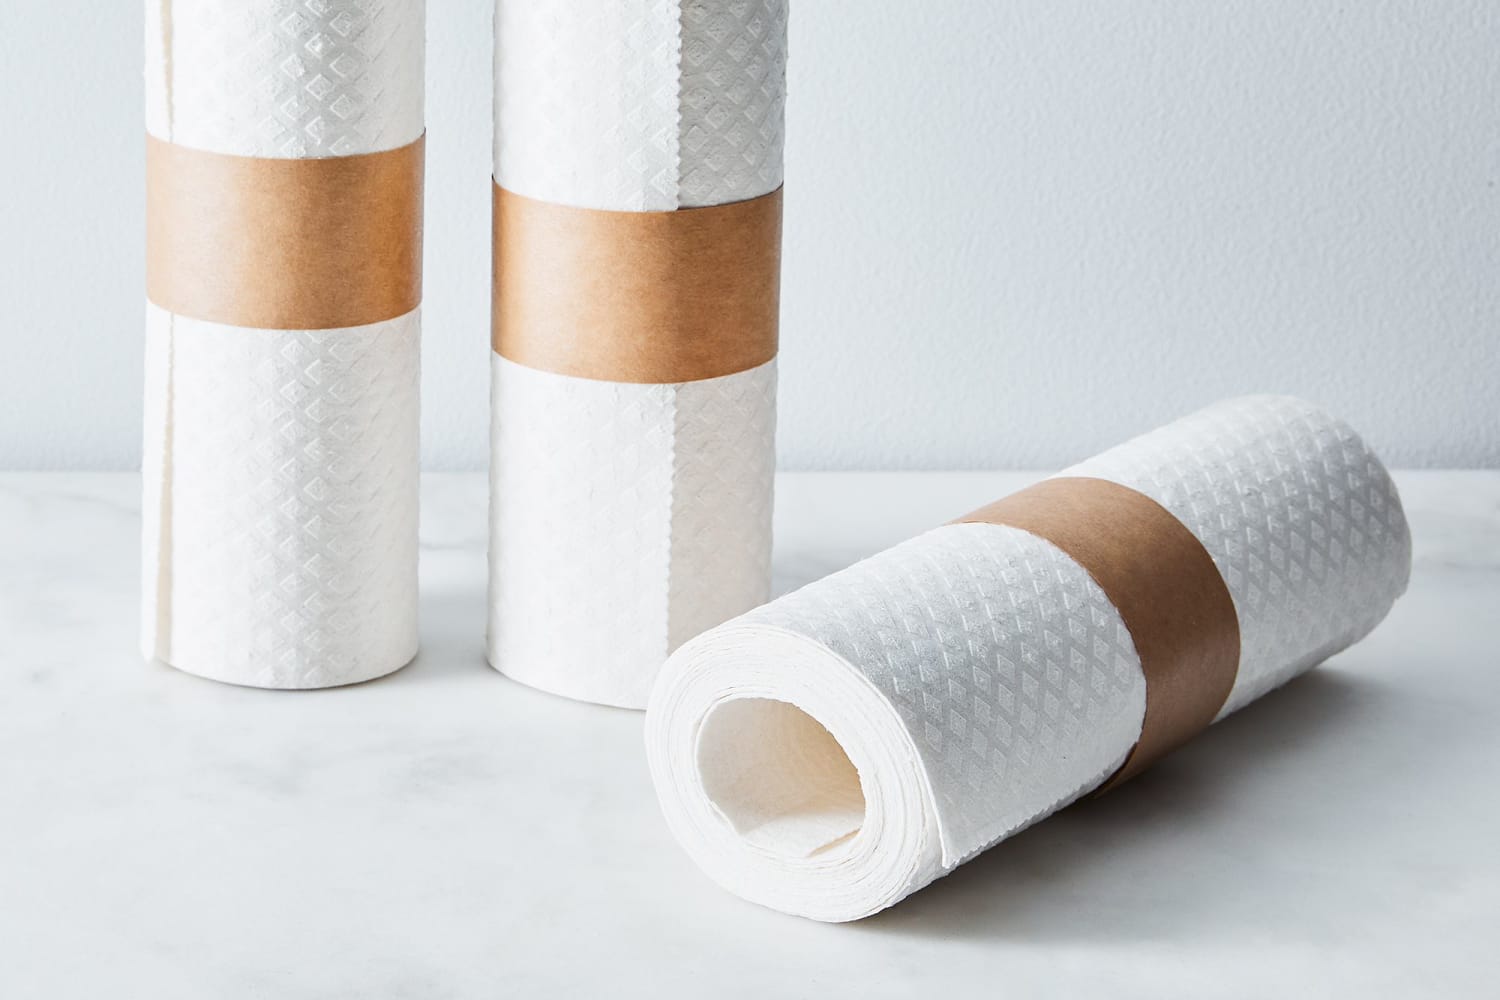 11 Ways to Reuse Paper Towel Rolls - The Hearty Soul : The Hearty Soul